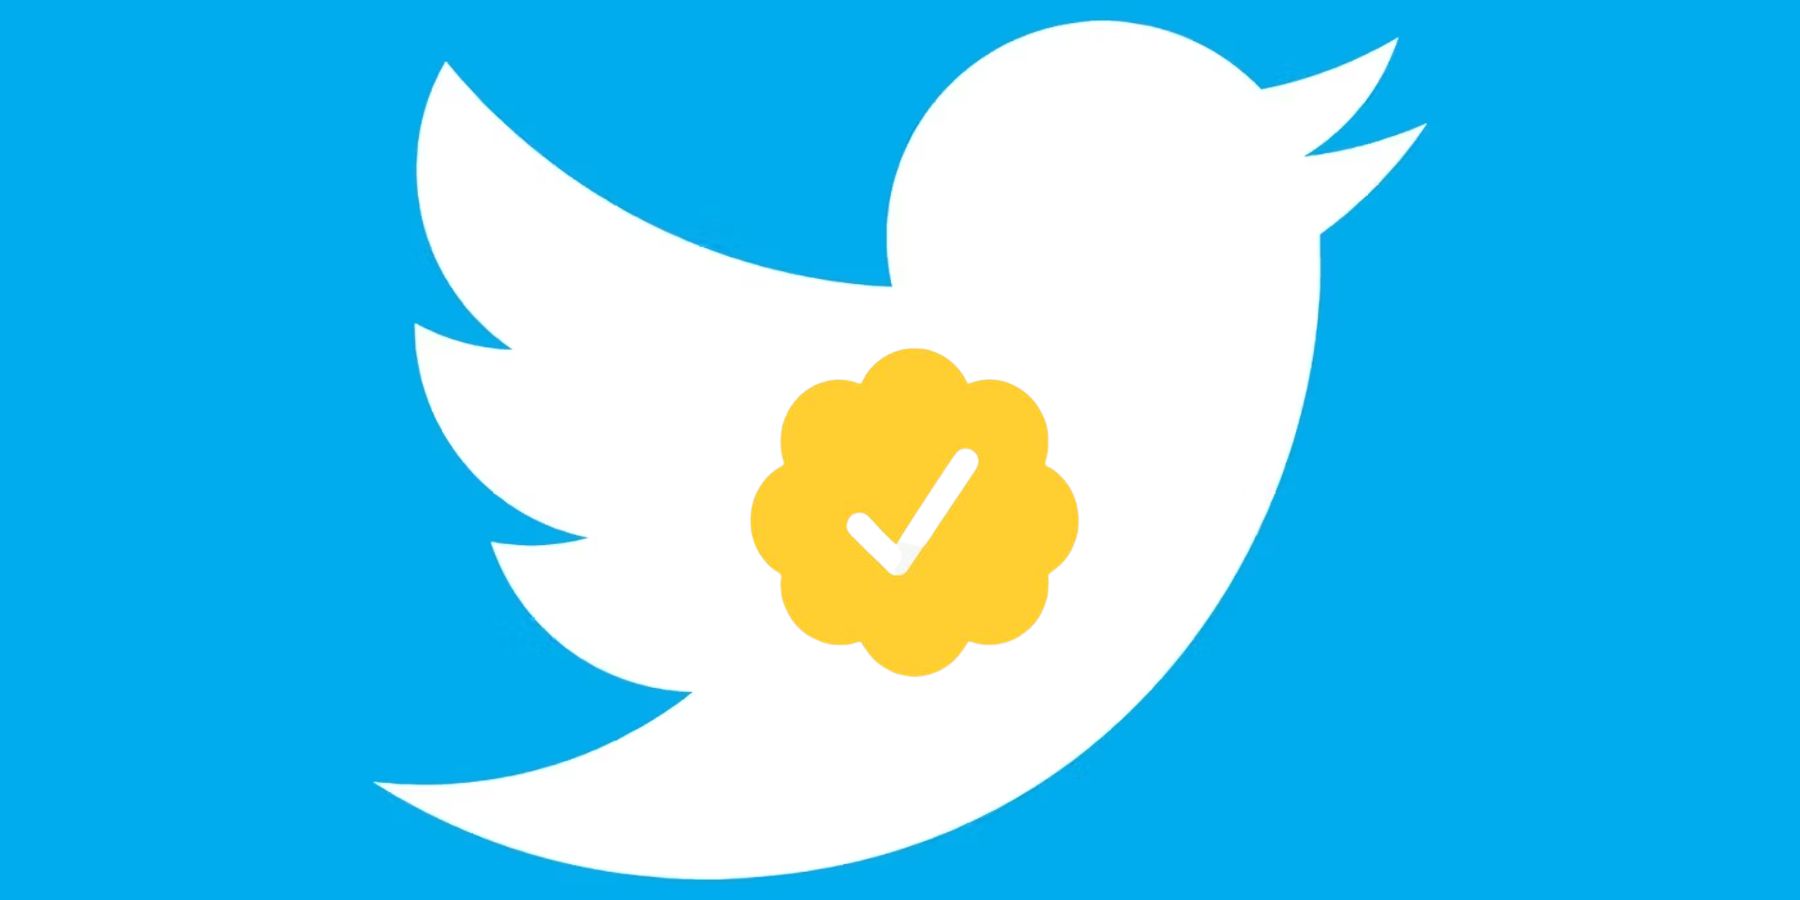 twitter logo and gold checkmark